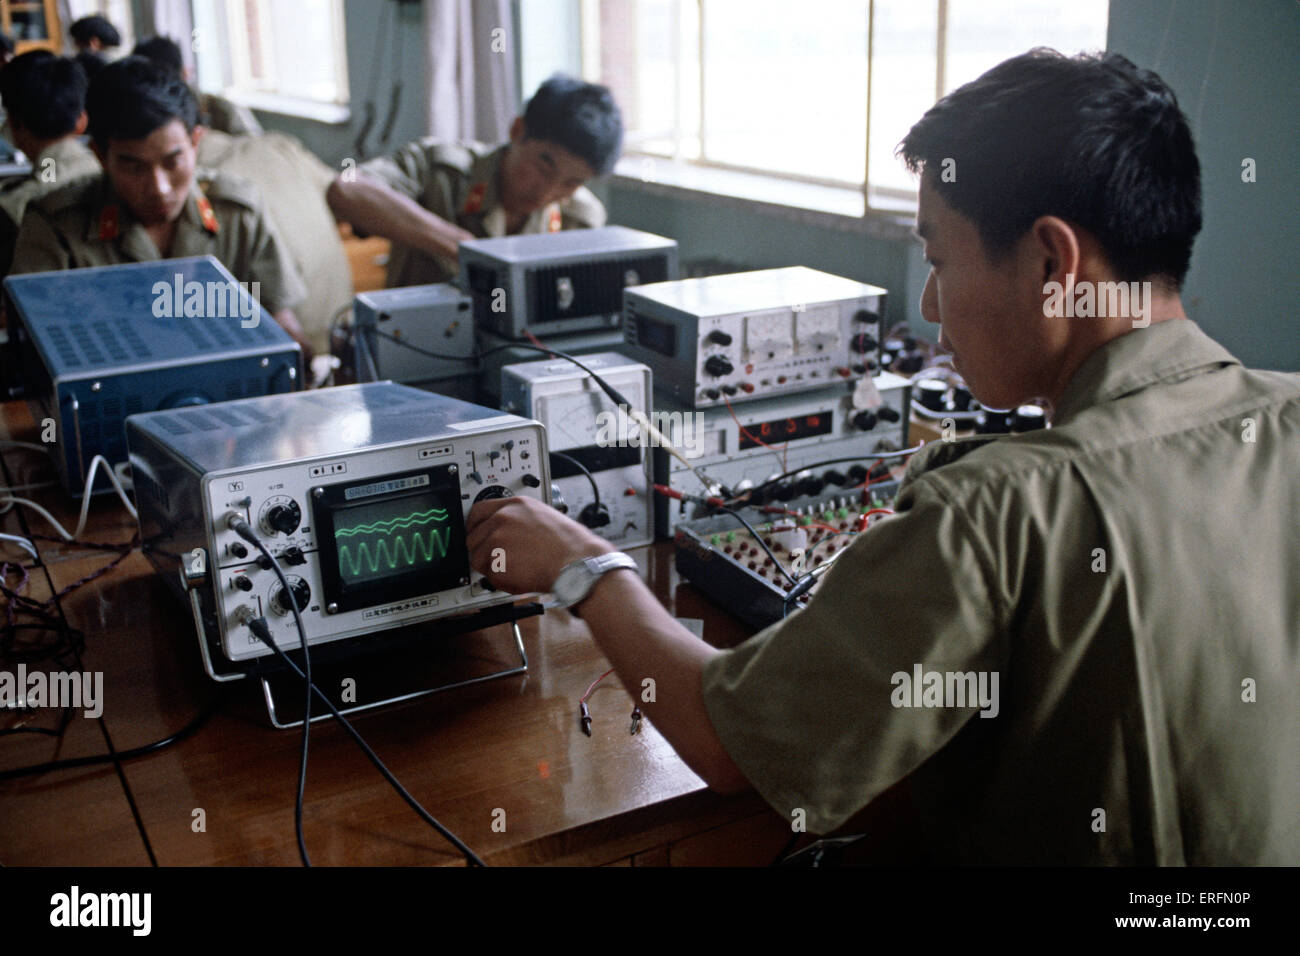 Electrical engineering training for Peoples Liberation Army officers at Shijiazhuang Military Academy, Hubei province, China Stock Photo